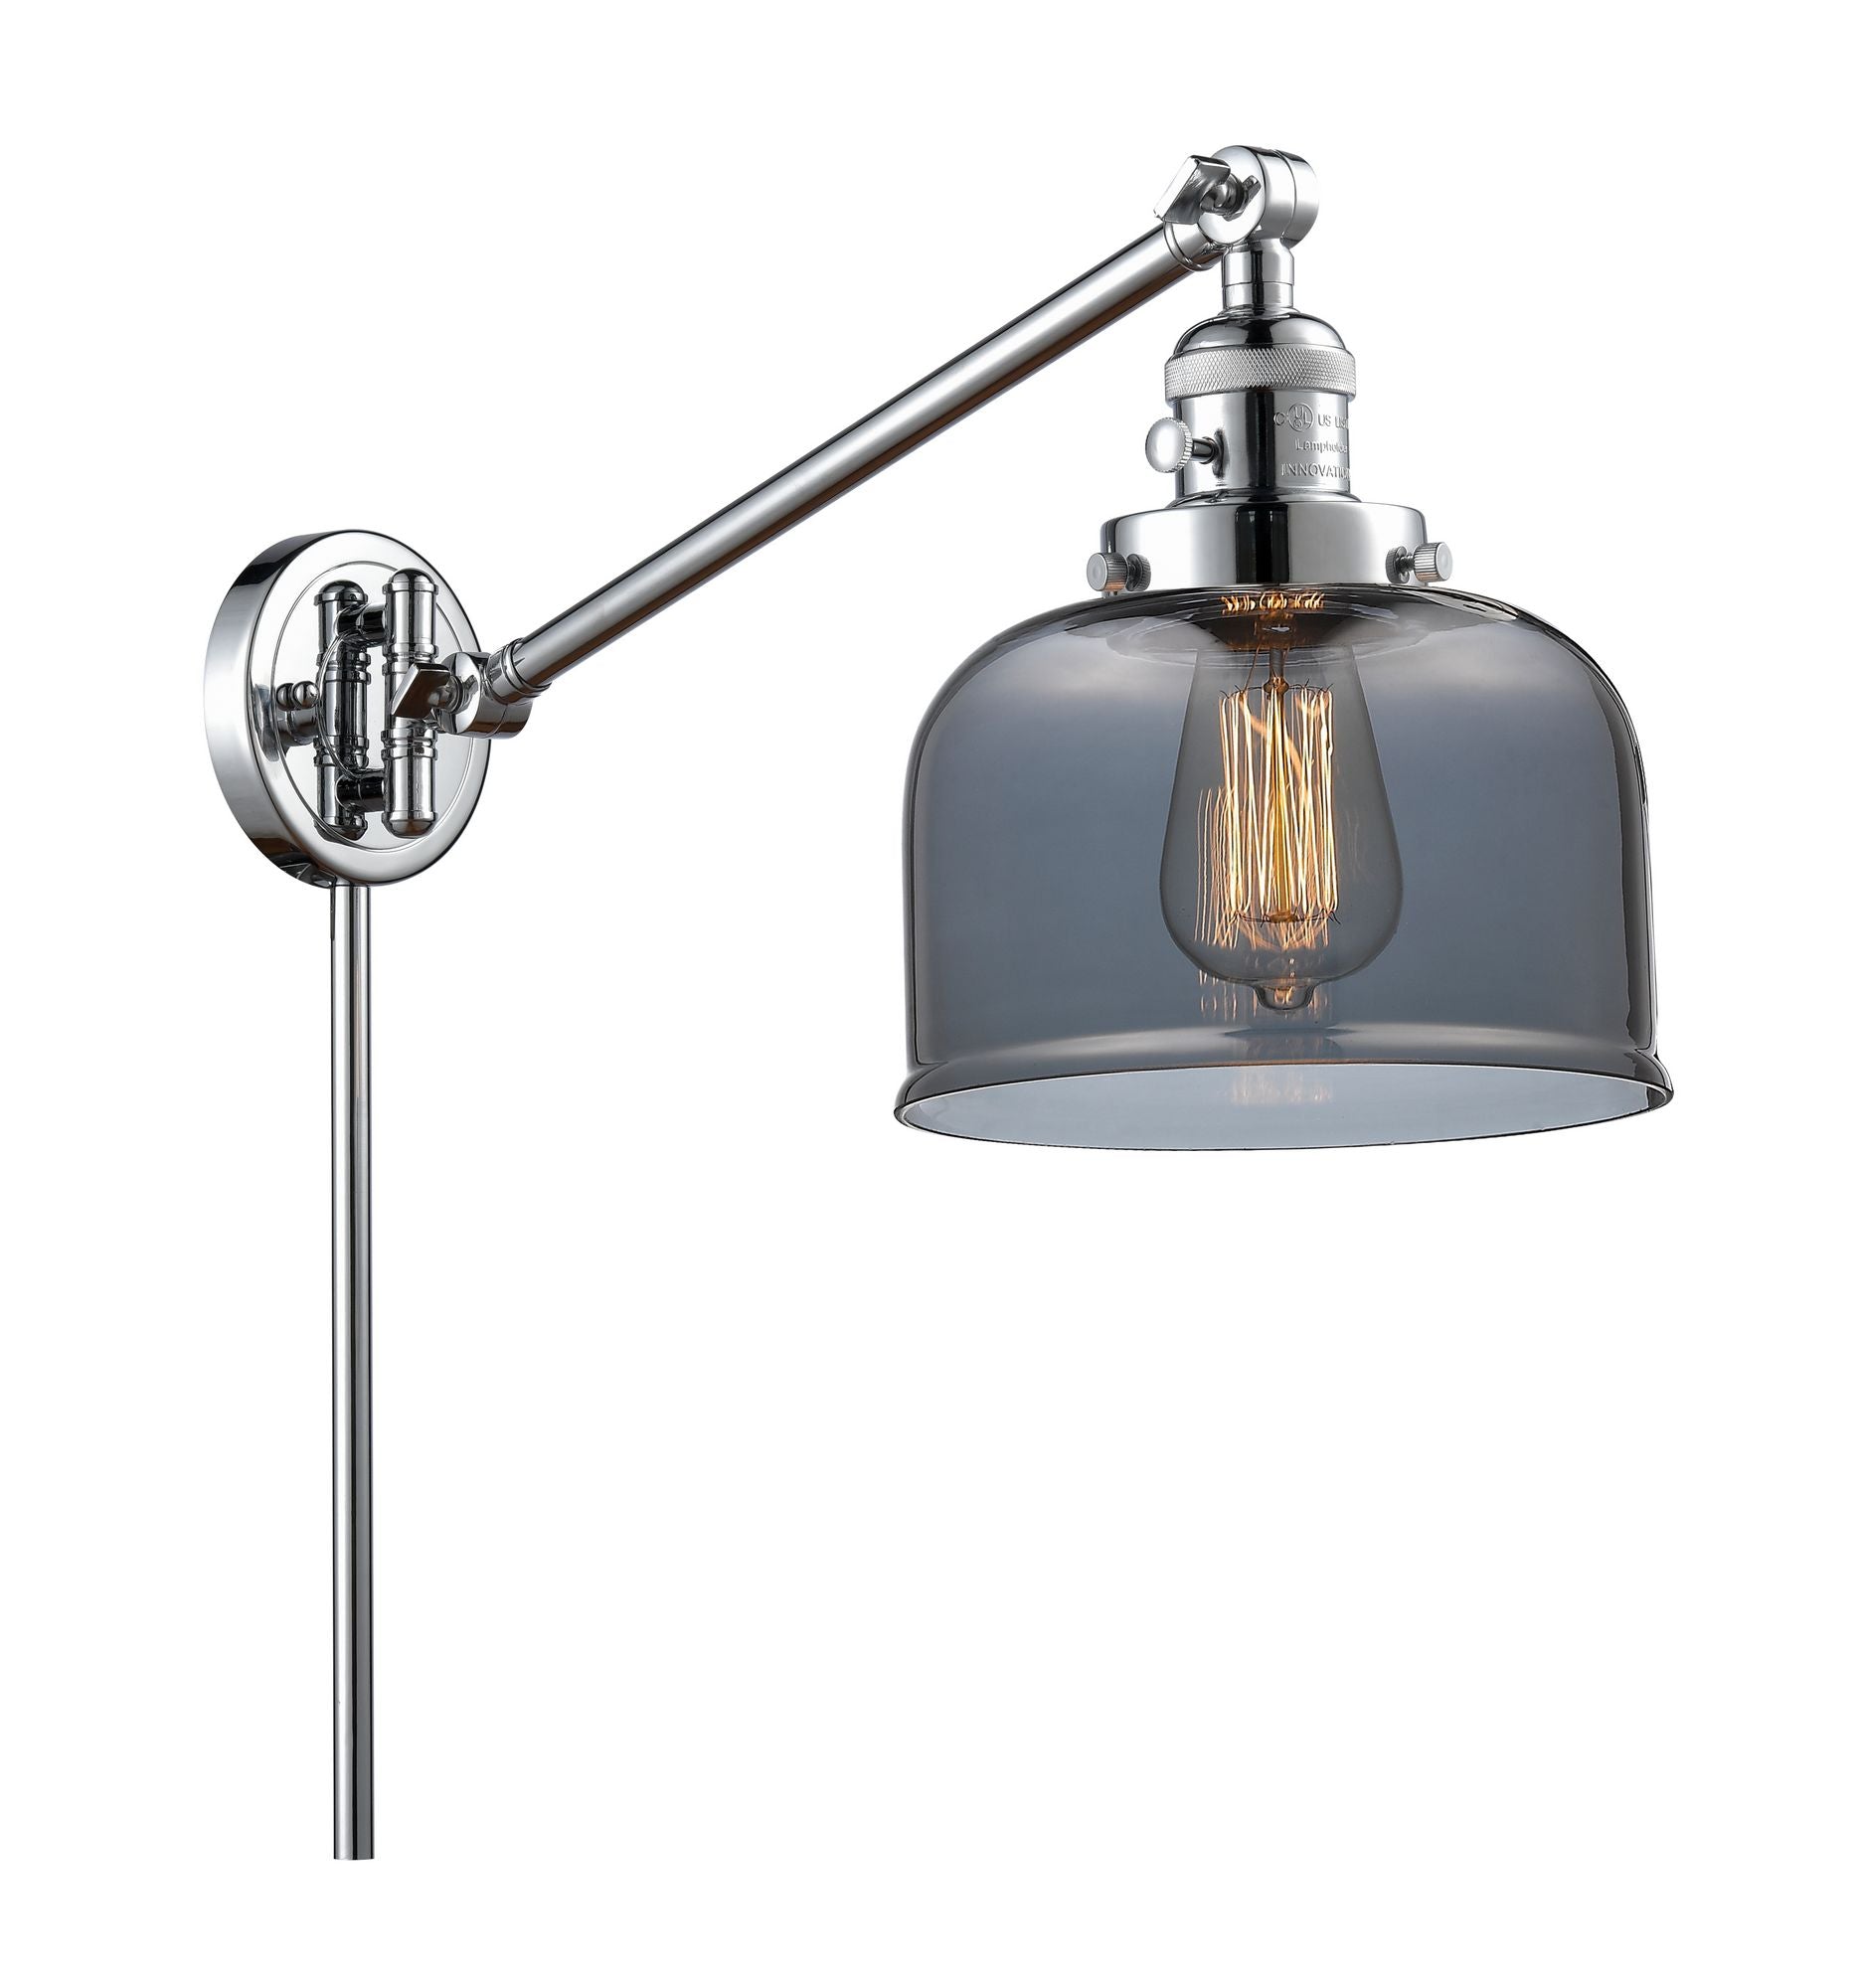 237-PC-G73 1-Light 8" Polished Chrome Swing Arm - Plated Smoke Large Bell Glass - LED Bulb - Dimmensions: 8 x 21 x 25 - Glass Up or Down: Yes